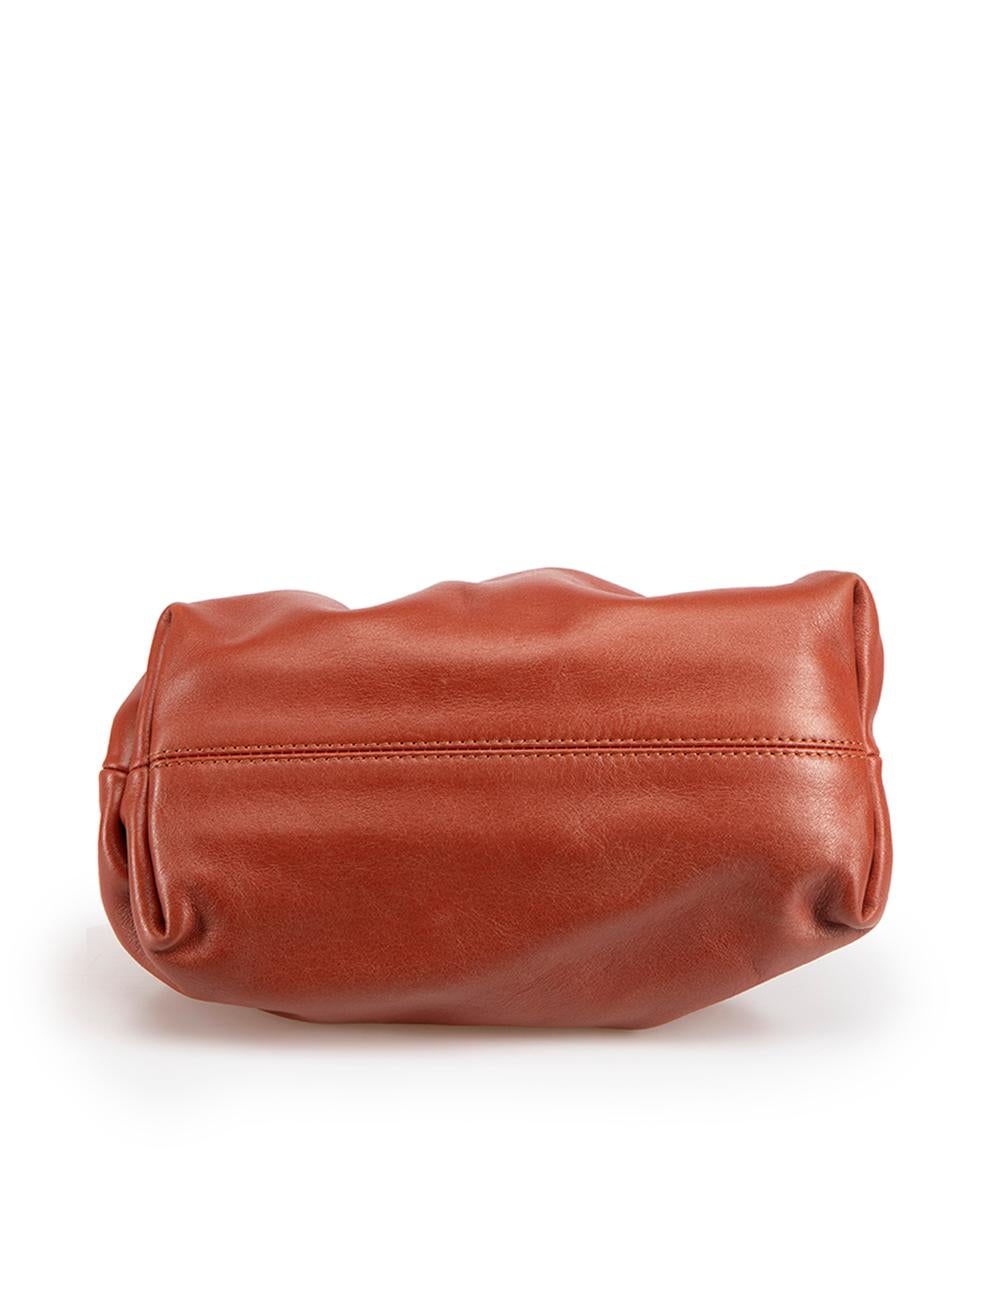 Women's Manu Atelier Brick Red Leather Ruched Mini Bag